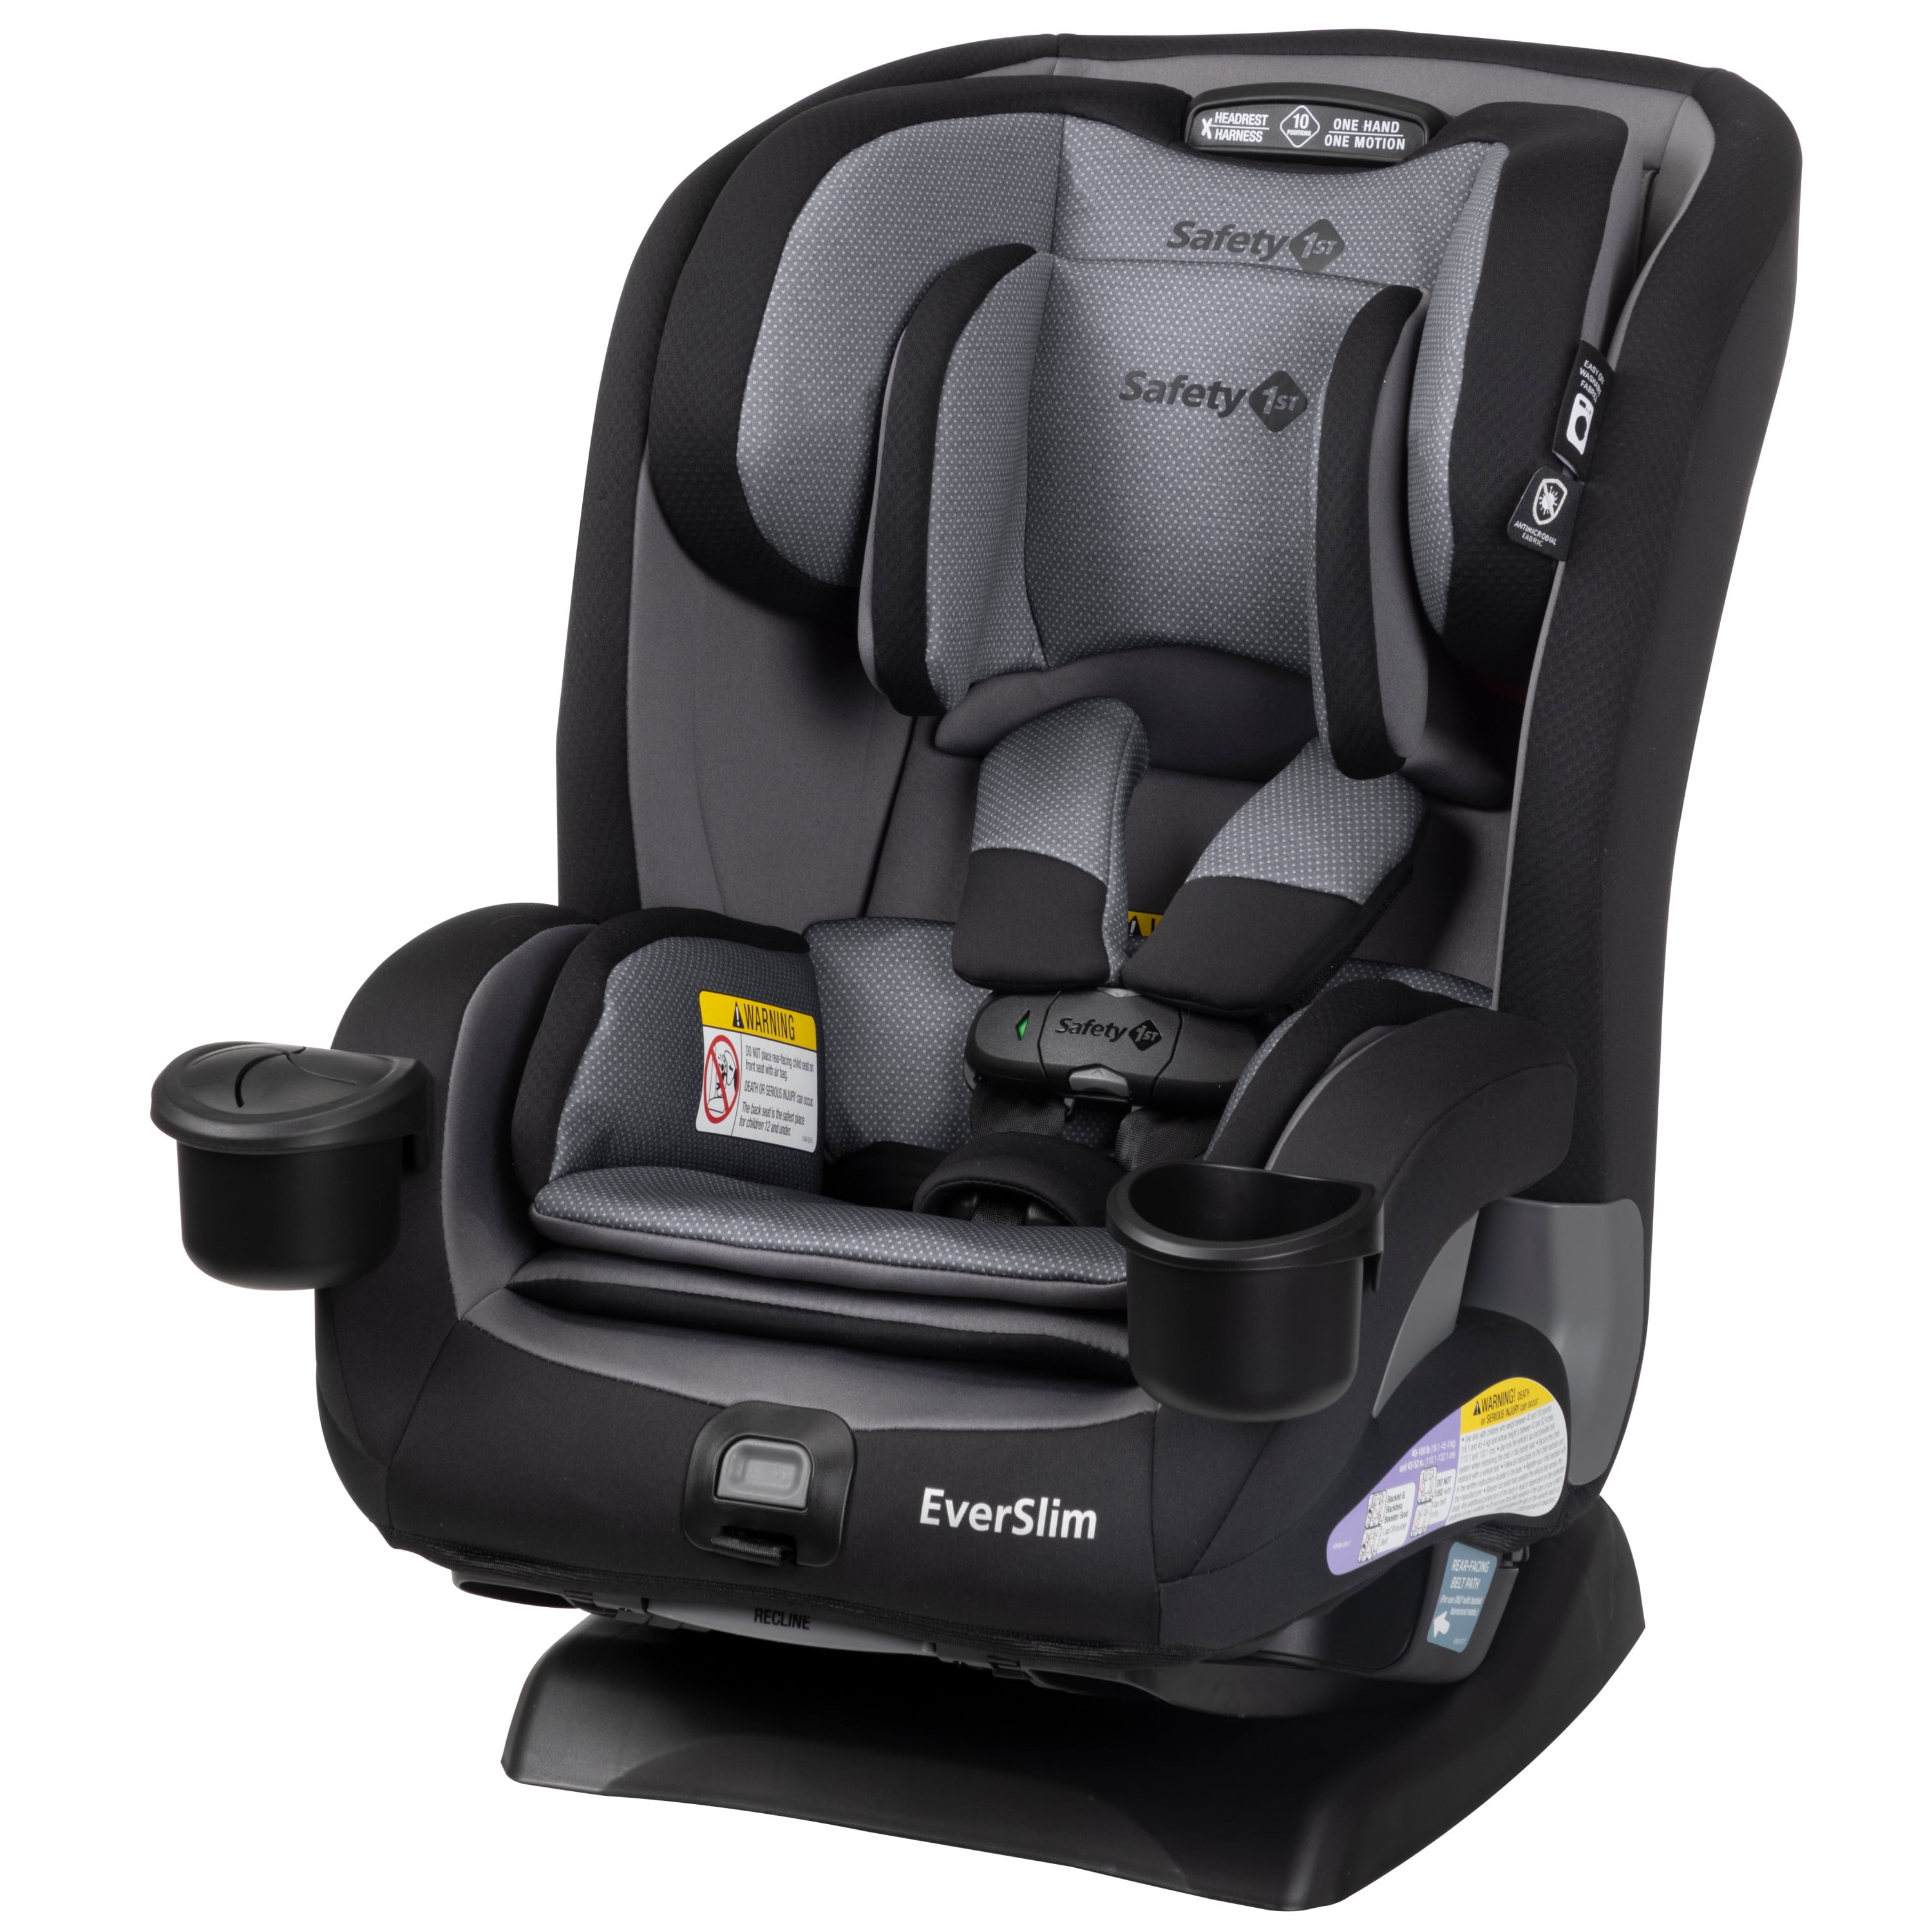 Safety 1st EverSlim Review (USA) » Safe in the Seat